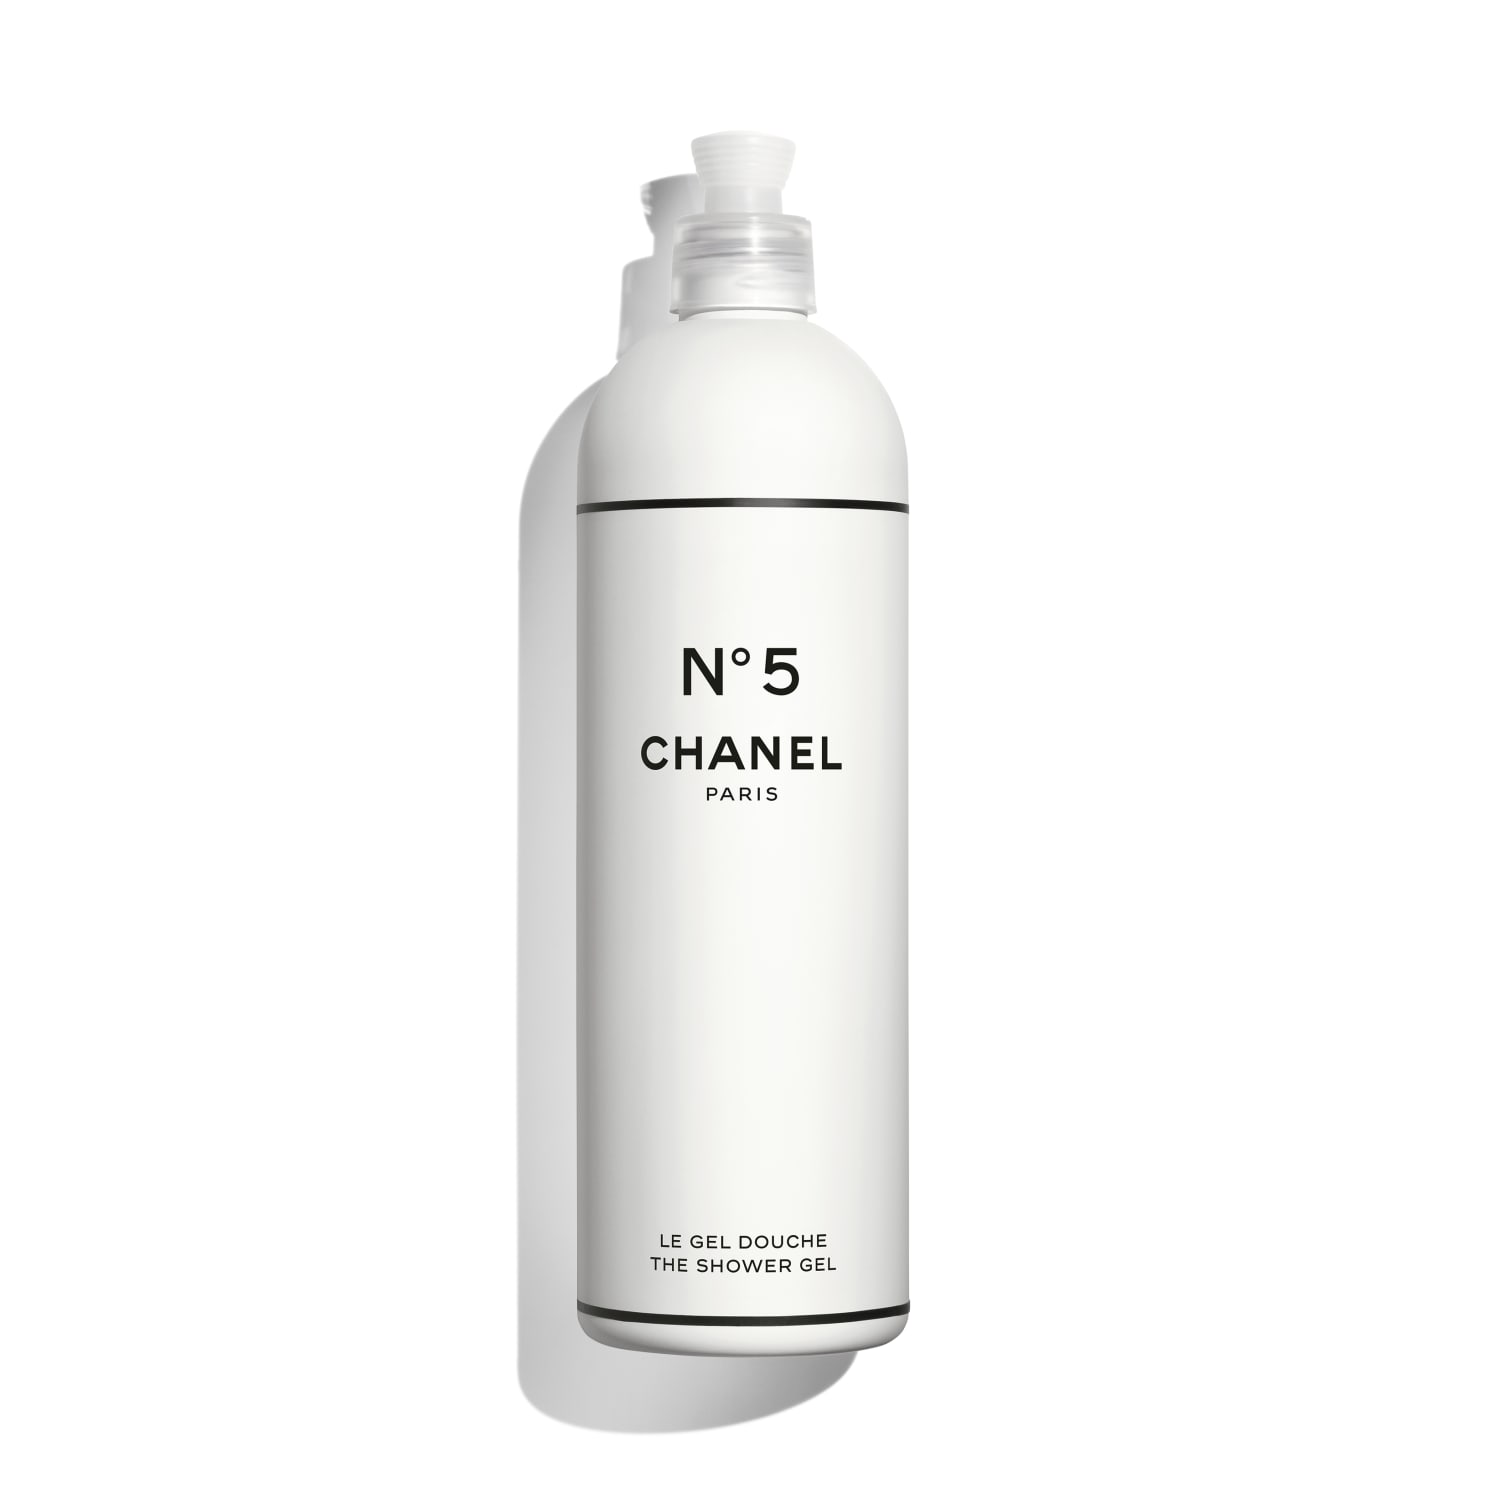 Chanel Factory Water Bottle FOR SALE! - PicClick